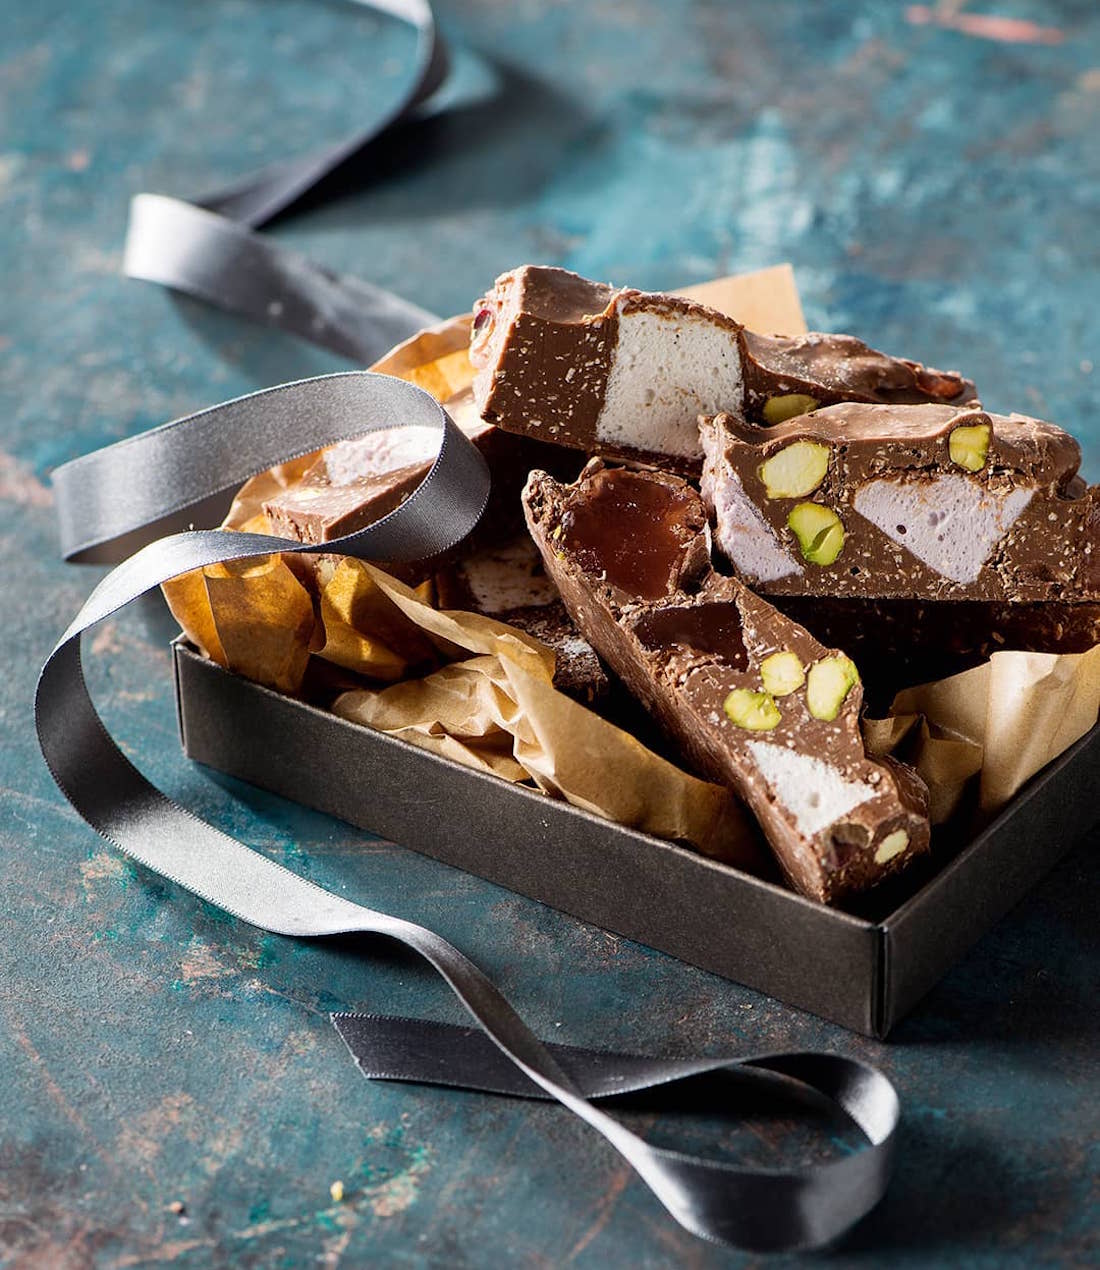 Rocky road chocolate from New Farm Confectionery. 